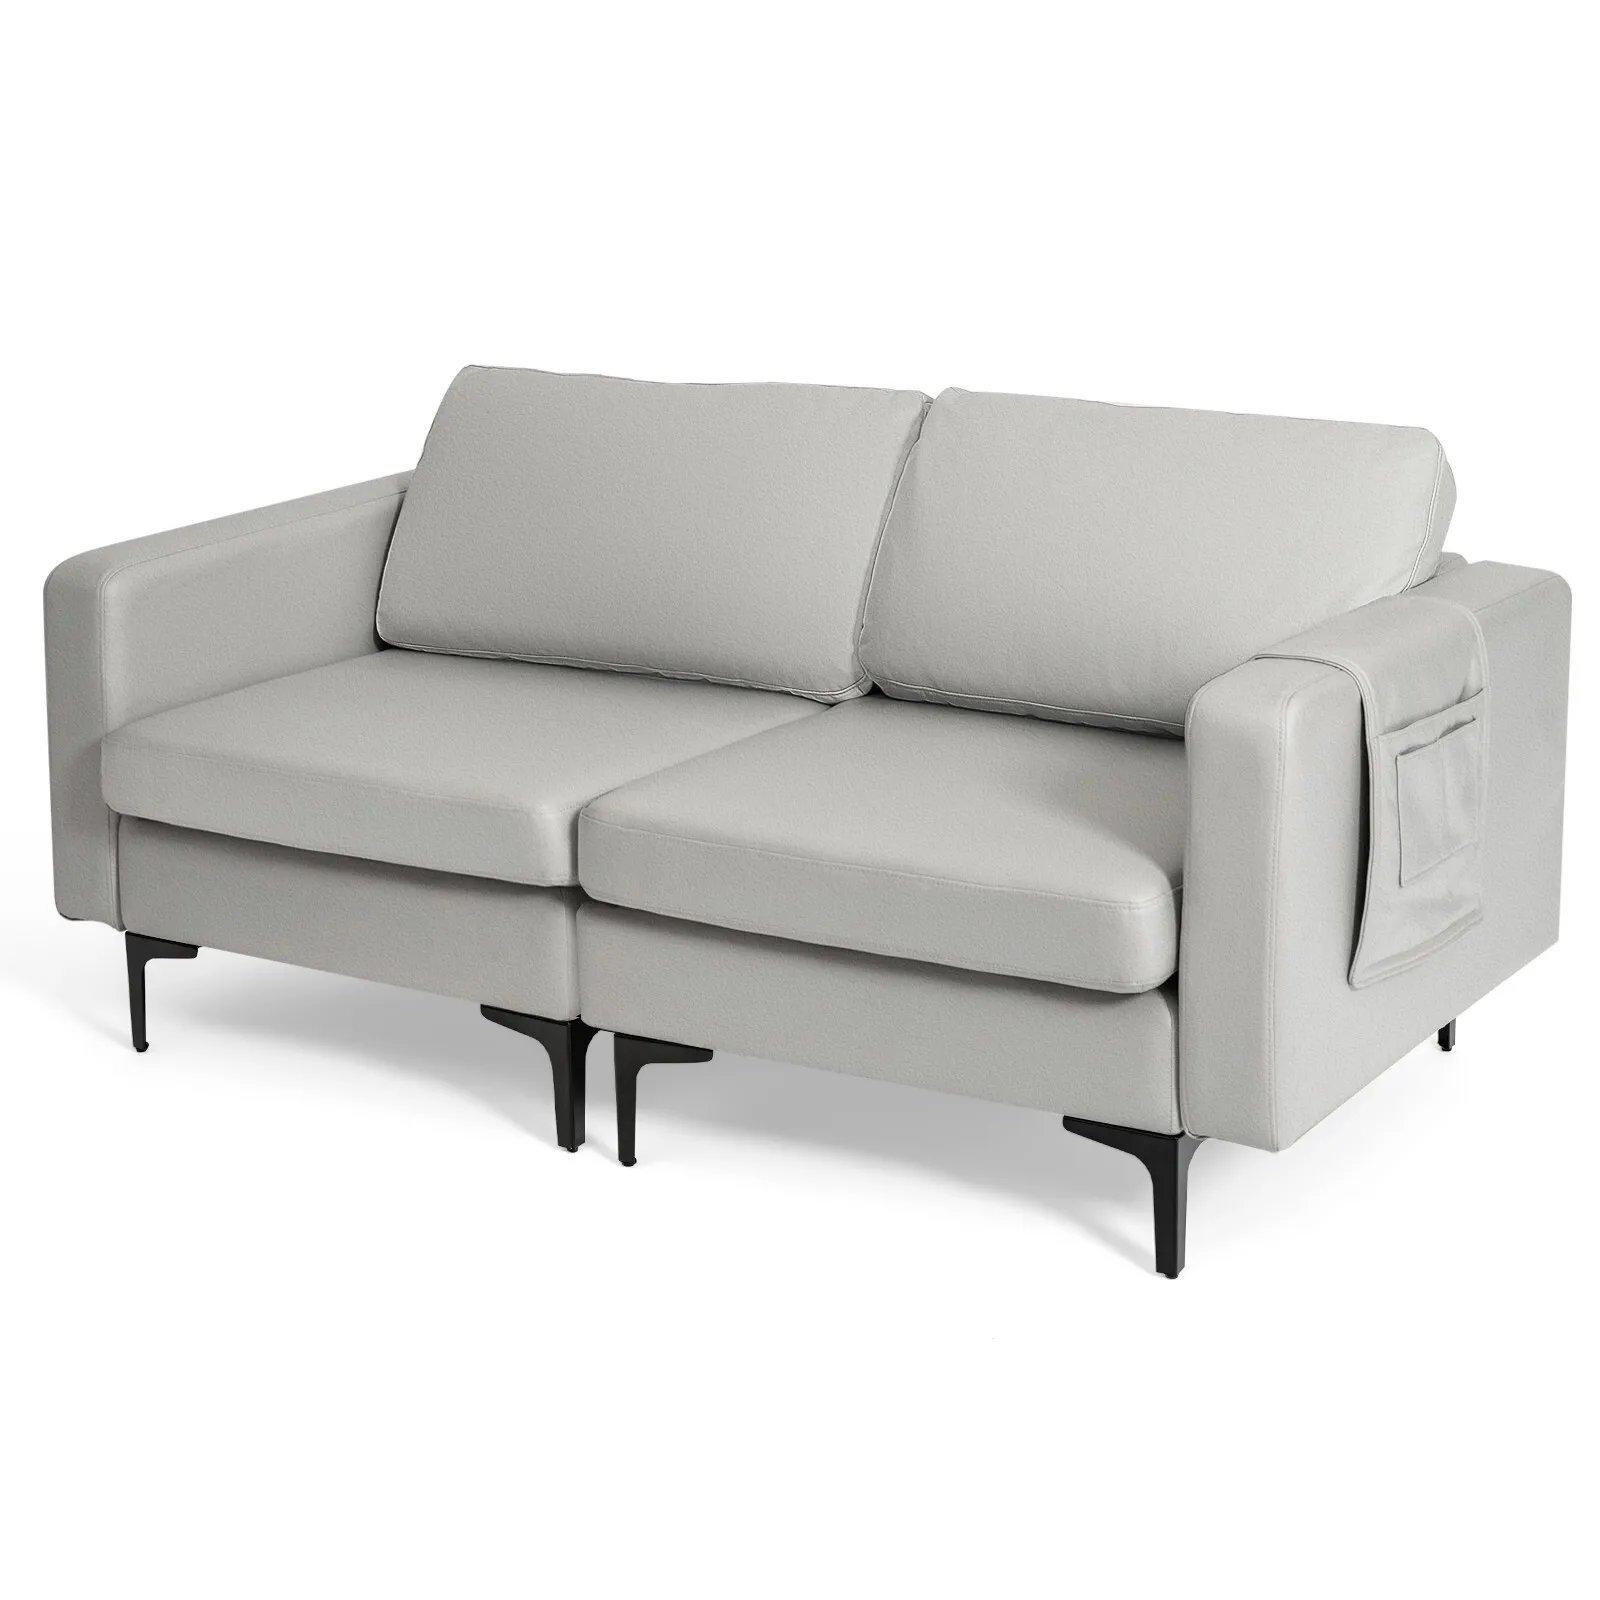 Modern Sofa Couch Loveseat 2-3-Seater Sofa Seat Upholstered Padded Cushions